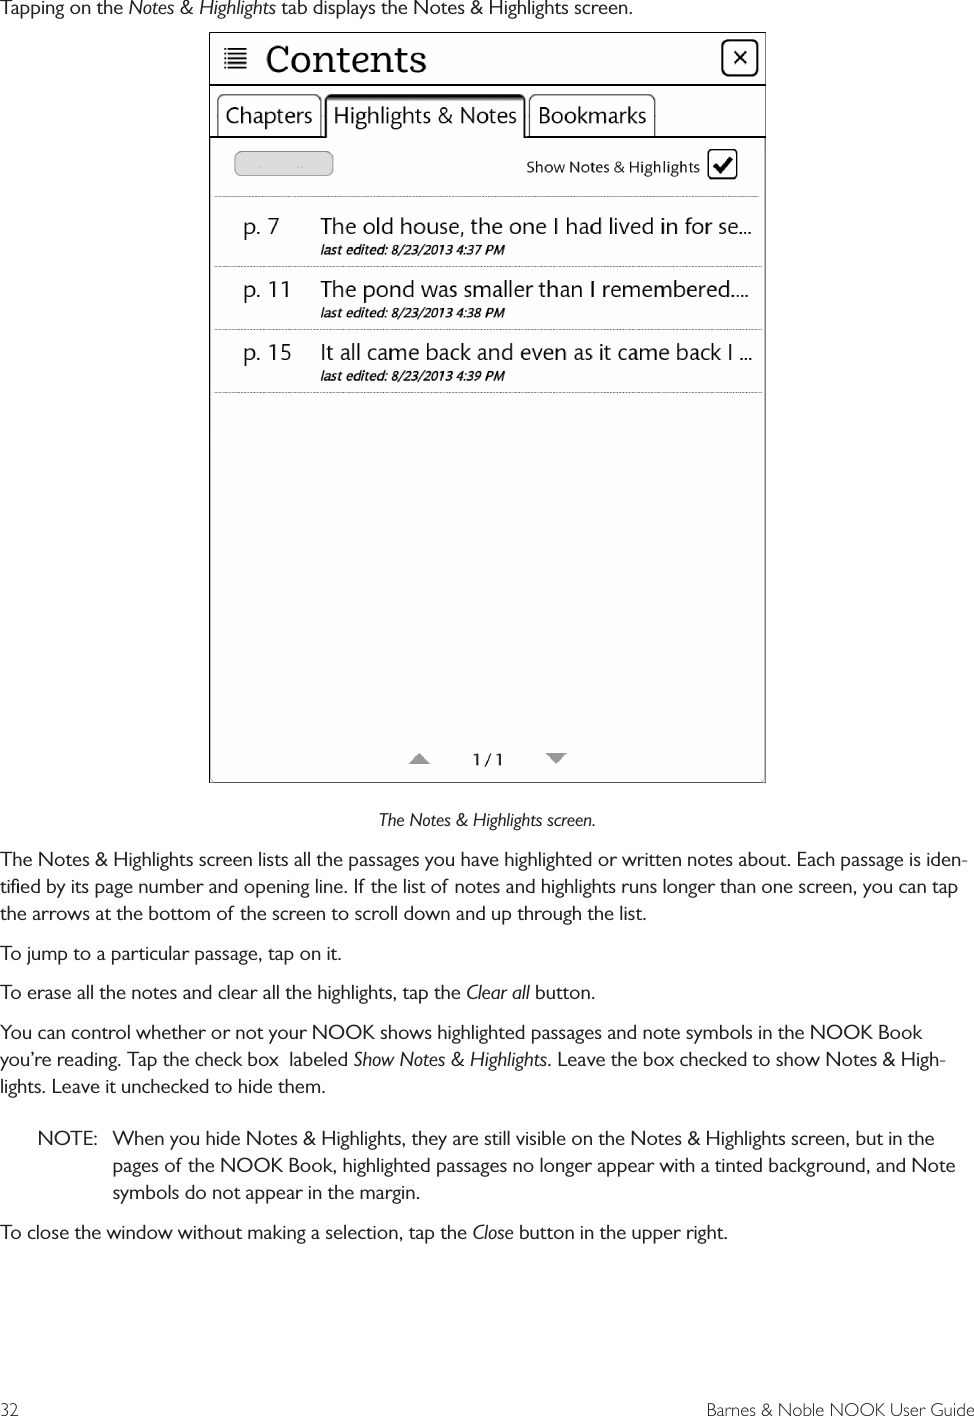 32  Barnes &amp; Noble NOOK User GuideTapping on the Notes &amp; Highlights tab displays the Notes &amp; Highlights screen.The Notes &amp; Highlights screen.The Notes &amp; Highlights screen lists all the passages you have highlighted or written notes about. Each passage is iden-tiﬁed by its page number and opening line. If the list of notes and highlights runs longer than one screen, you can tap the arrows at the bottom of the screen to scroll down and up through the list. To jump to a particular passage, tap on it. To erase all the notes and clear all the highlights, tap the Clear all button.You can control whether or not your NOOK shows highlighted passages and note symbols in the NOOK Book you’re reading. Tap the check box  labeled Show Notes &amp; Highlights. Leave the box checked to show Notes &amp; High-lights. Leave it unchecked to hide them. NOTE:  When you hide Notes &amp; Highlights, they are still visible on the Notes &amp; Highlights screen, but in the pages of the NOOK Book, highlighted passages no longer appear with a tinted background, and Note symbols do not appear in the margin.To close the window without making a selection, tap the Close button in the upper right.